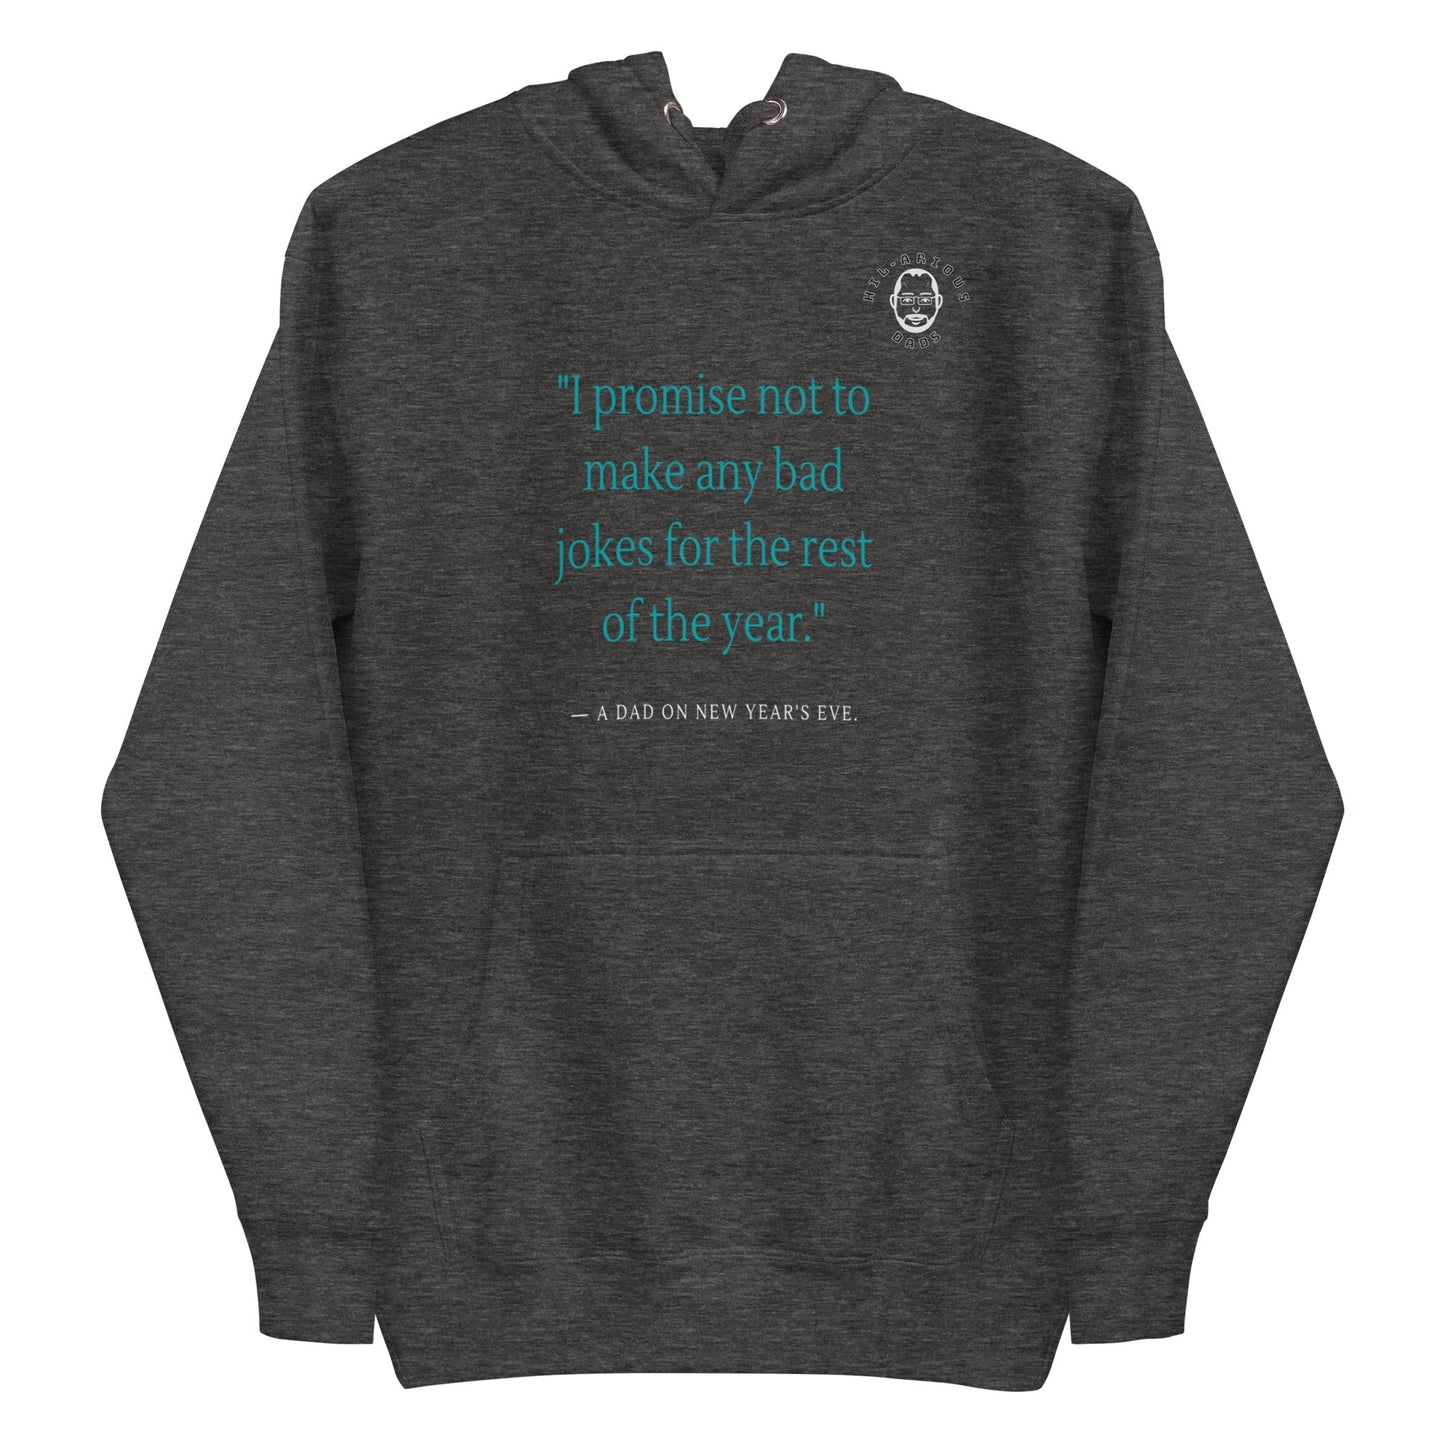 A dad's promise on New Year's Eve-Hoodie - Hil-arious Dads